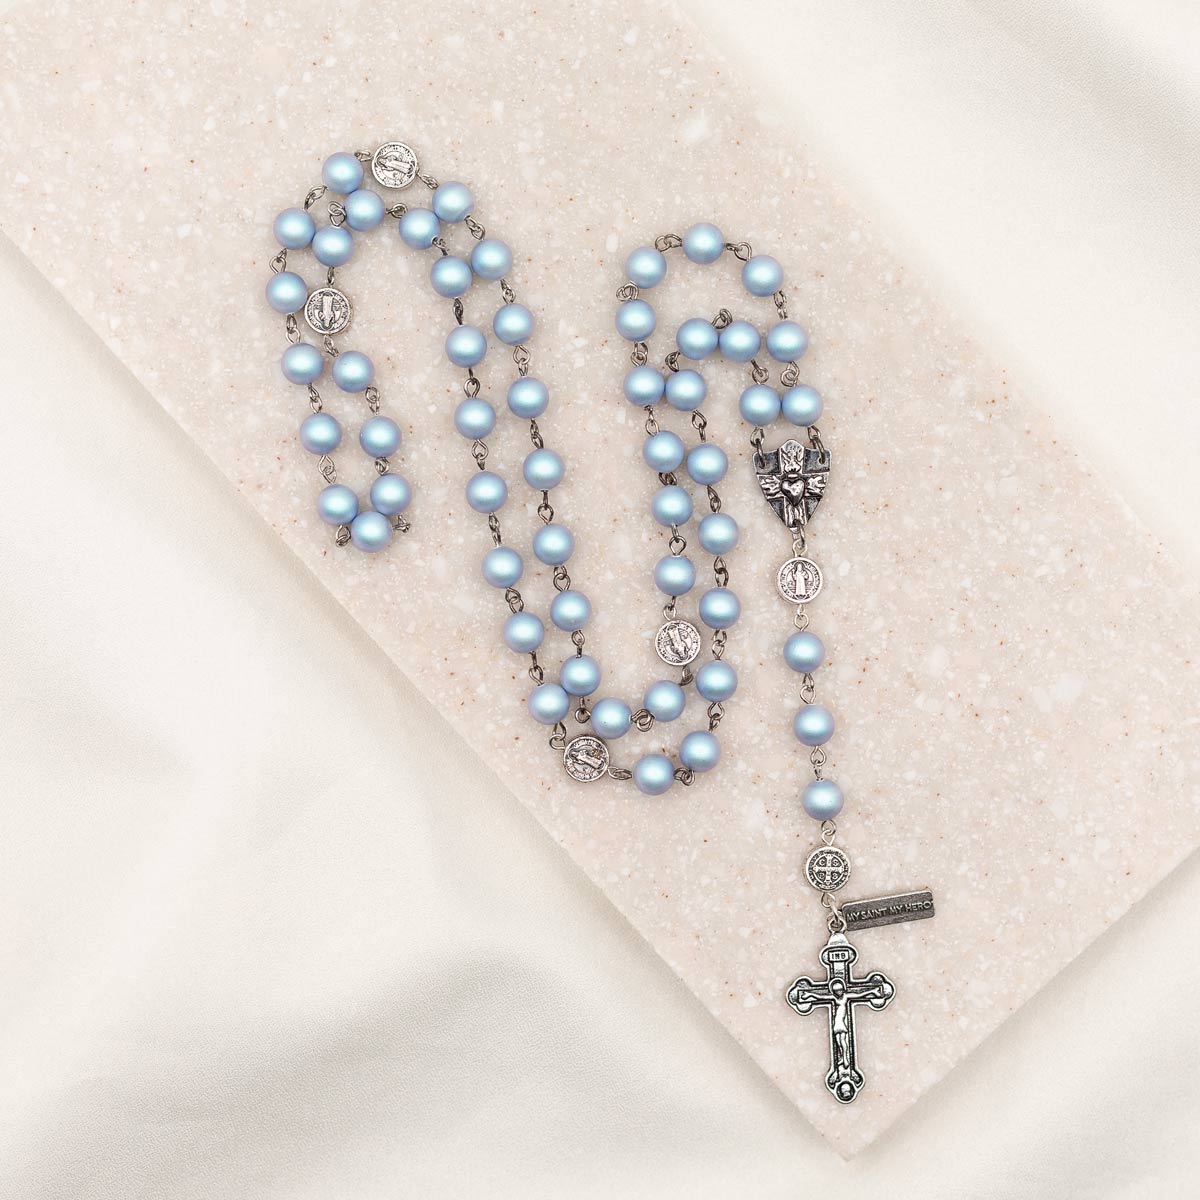 Rosary of Love